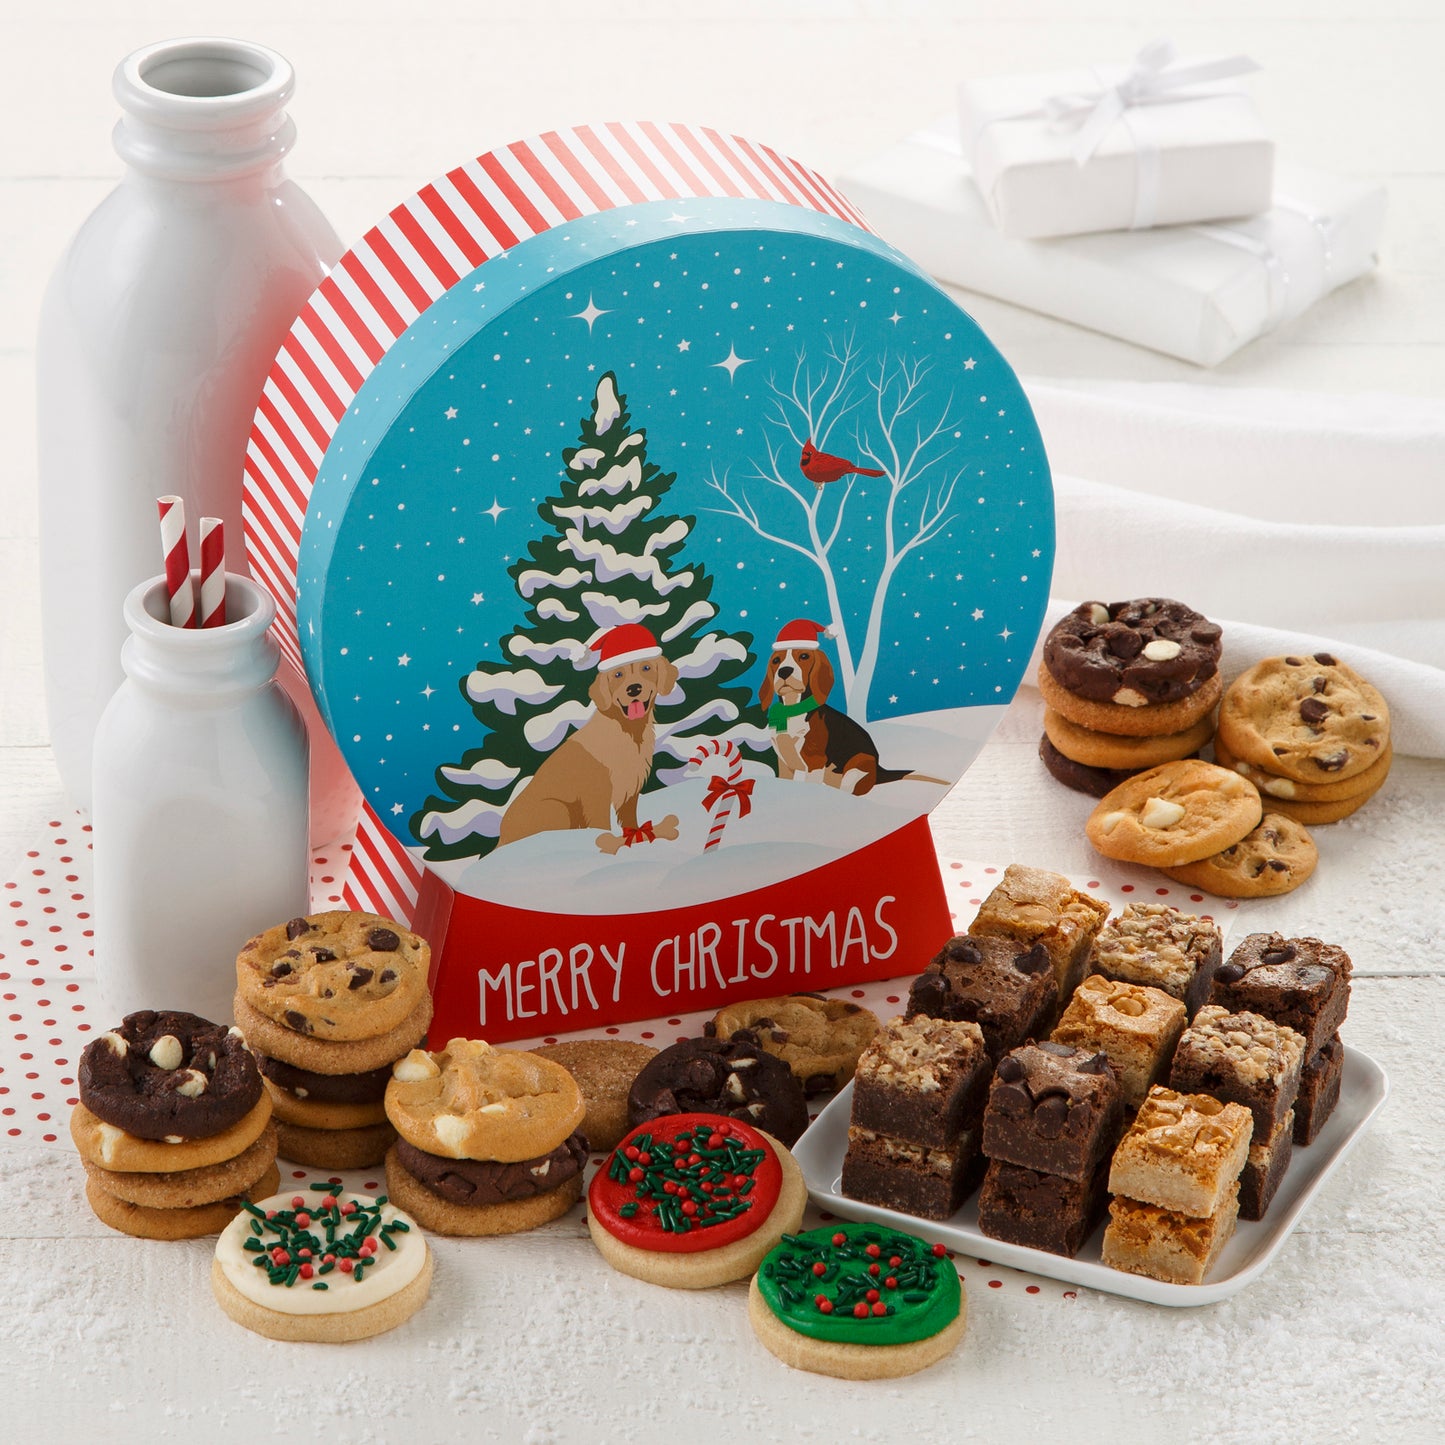 A snow globe-shaped gift box decorated with a winter scene of two dogs and a red cardinal bird and surrounded with an assortment of Nibblers®, brownie bites, and three frosted mini cookies with sprinkles.